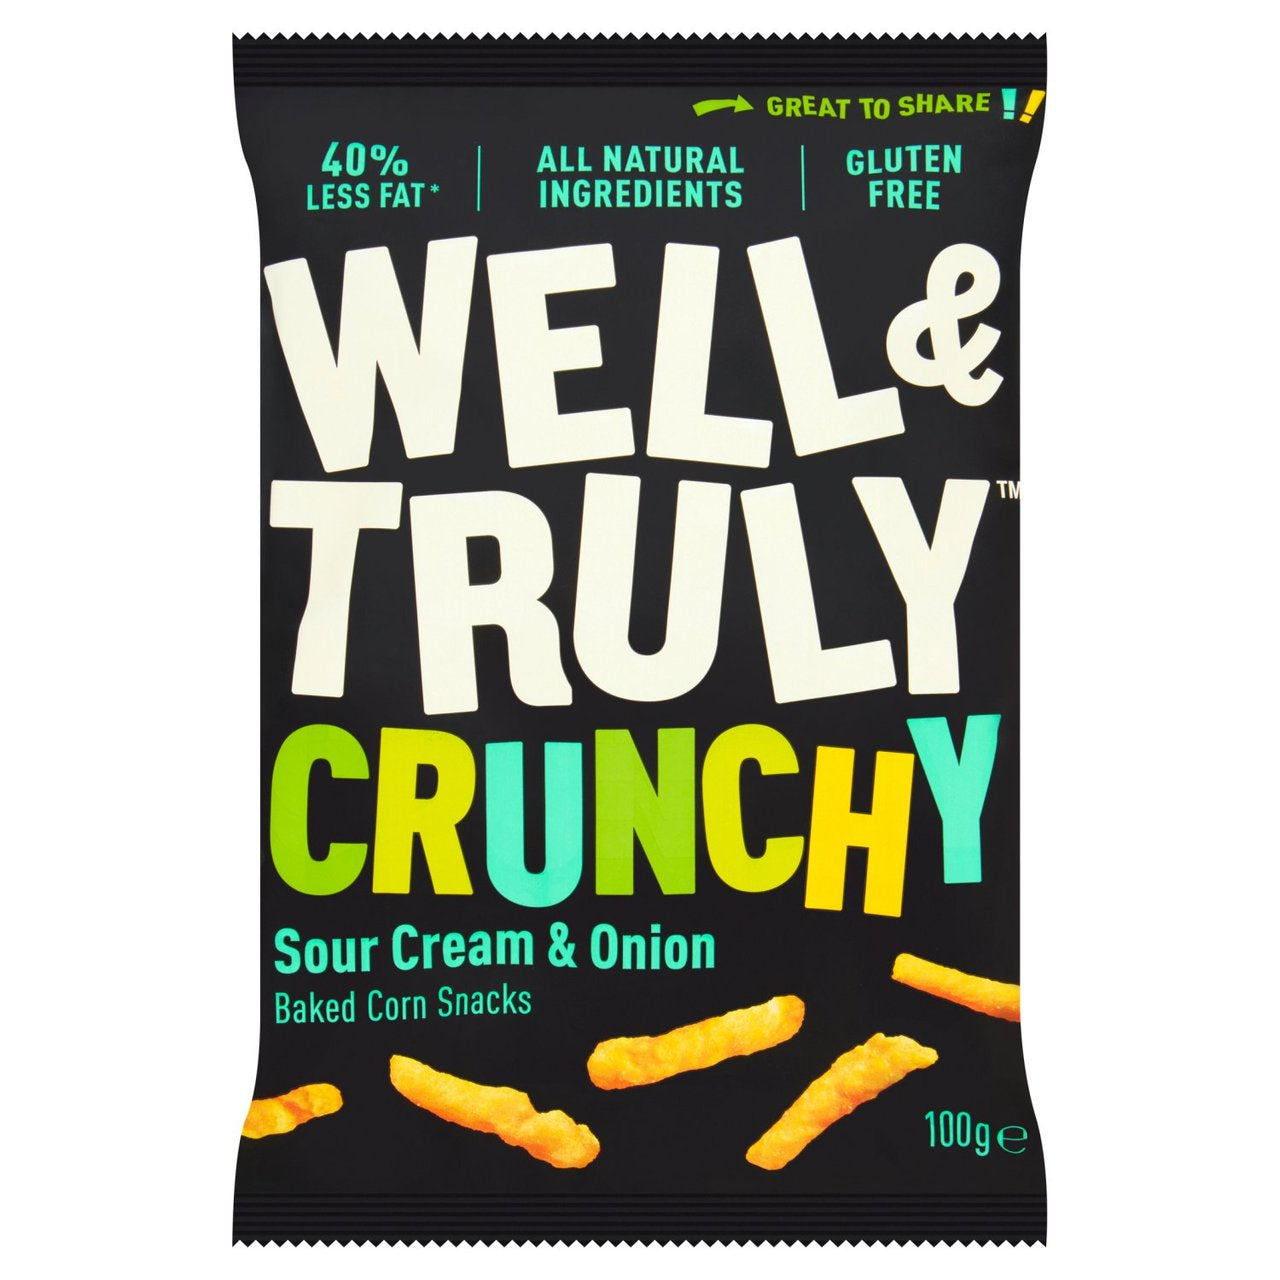 Well & Truly Crunchies Sour Cream & Onion 100g